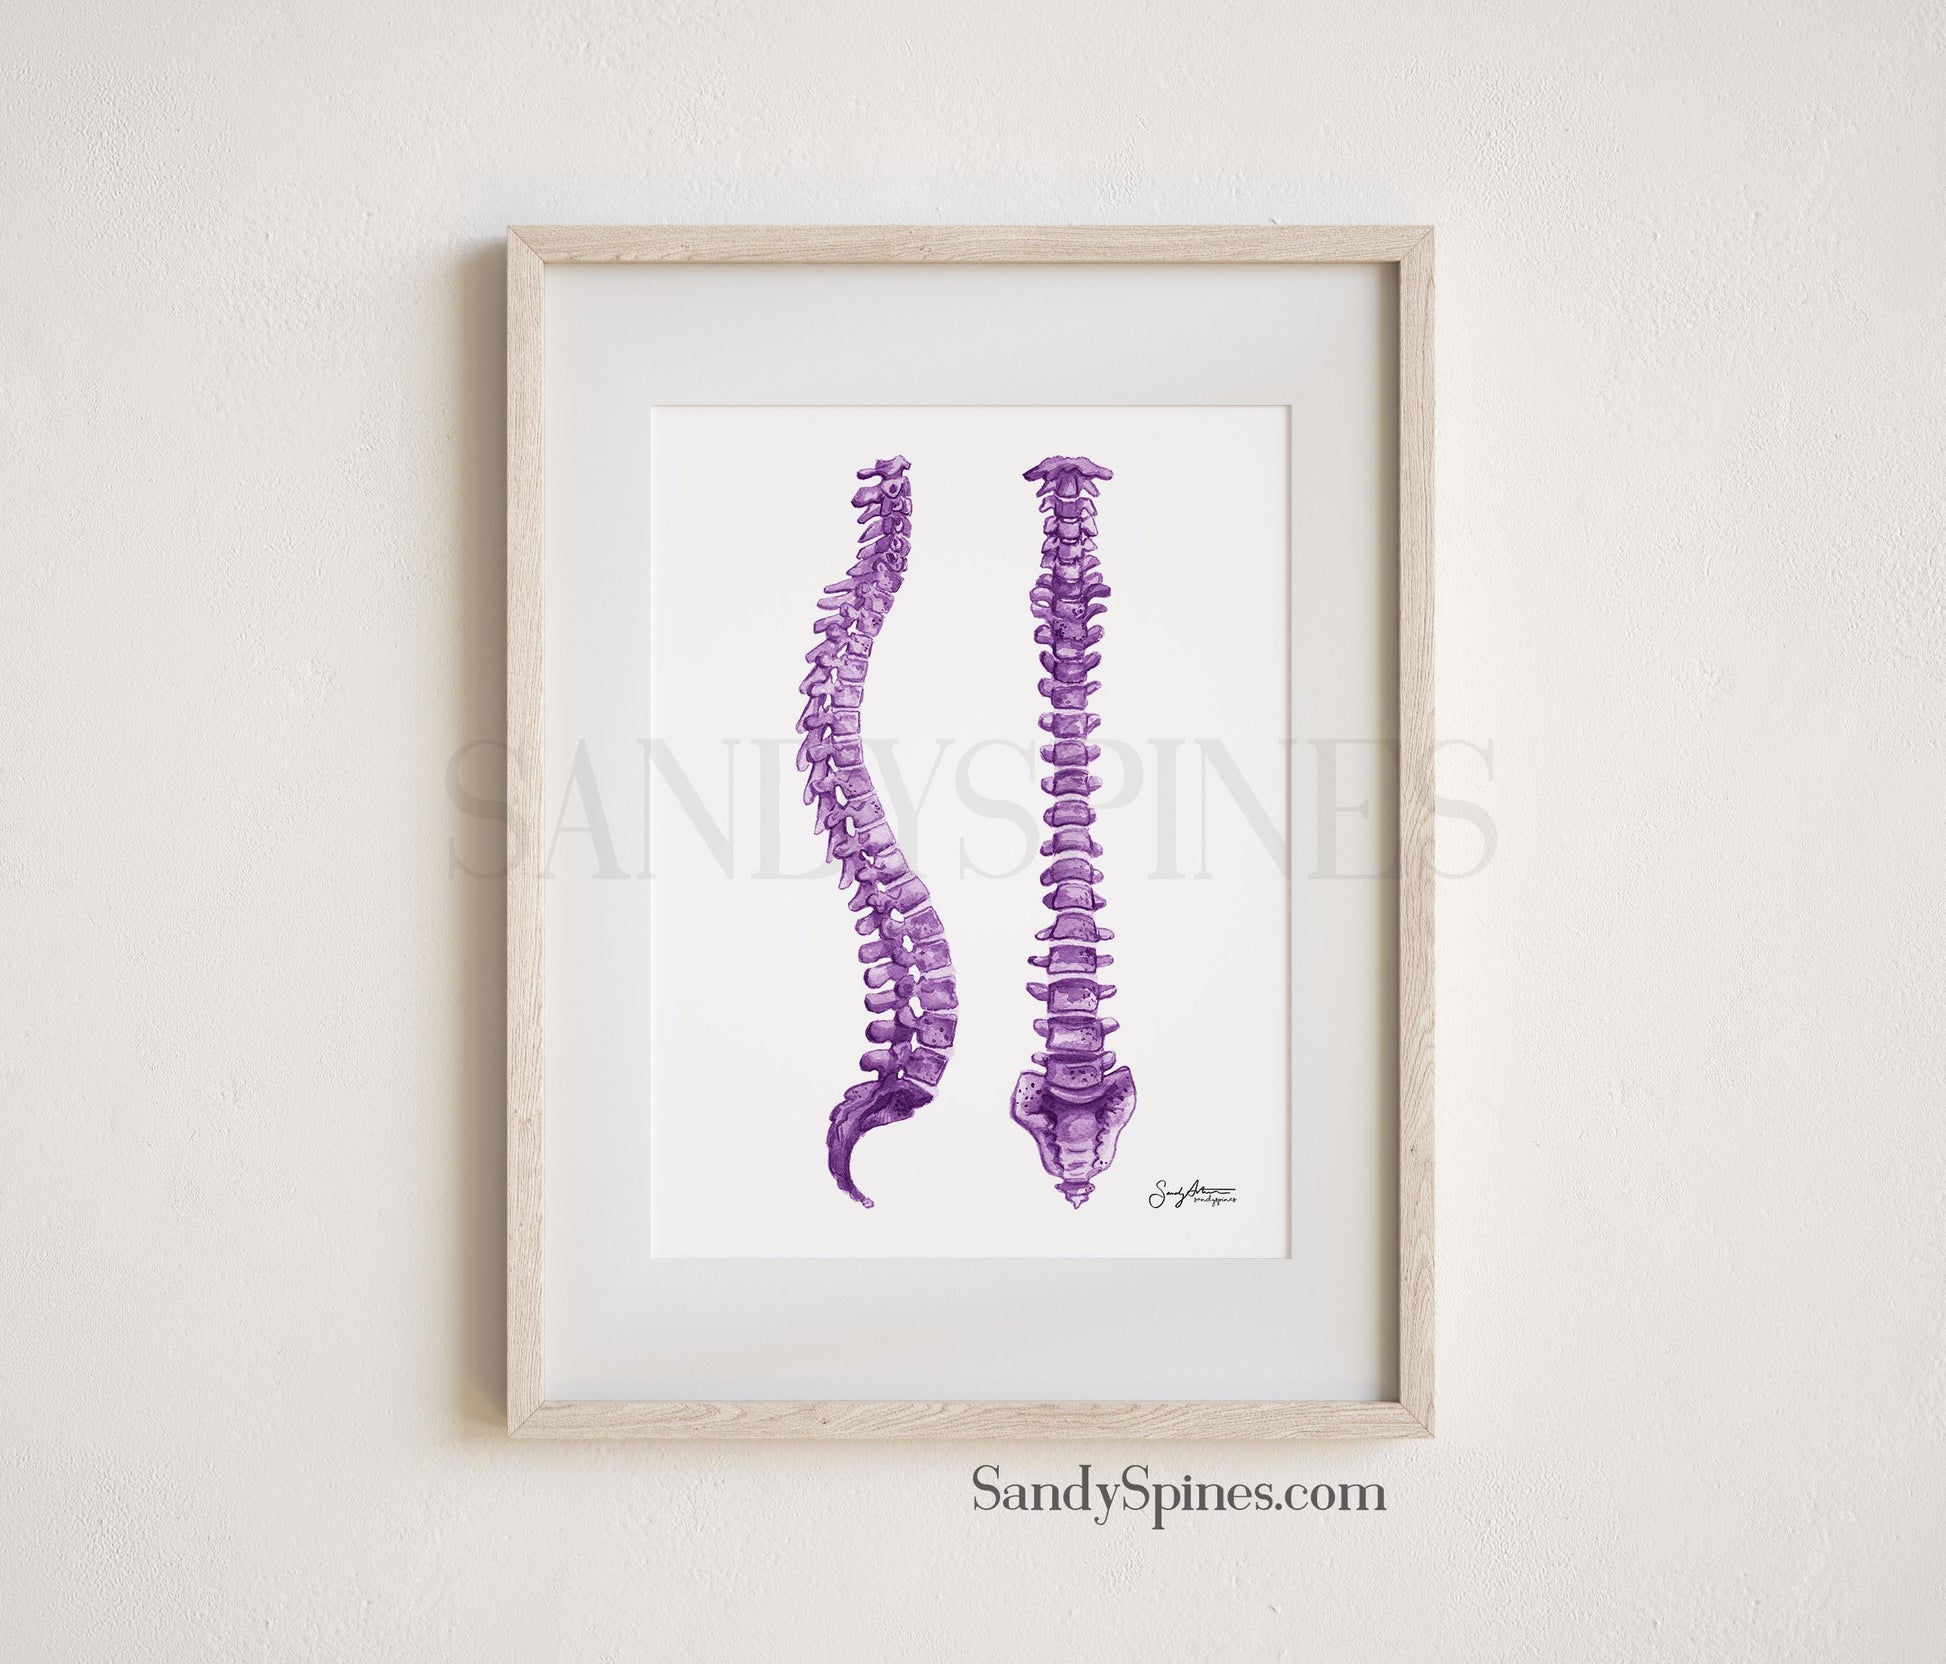 Purple watercolored spine print to decorate your office with. Would be perfect for a chiropractors office or doctors office.